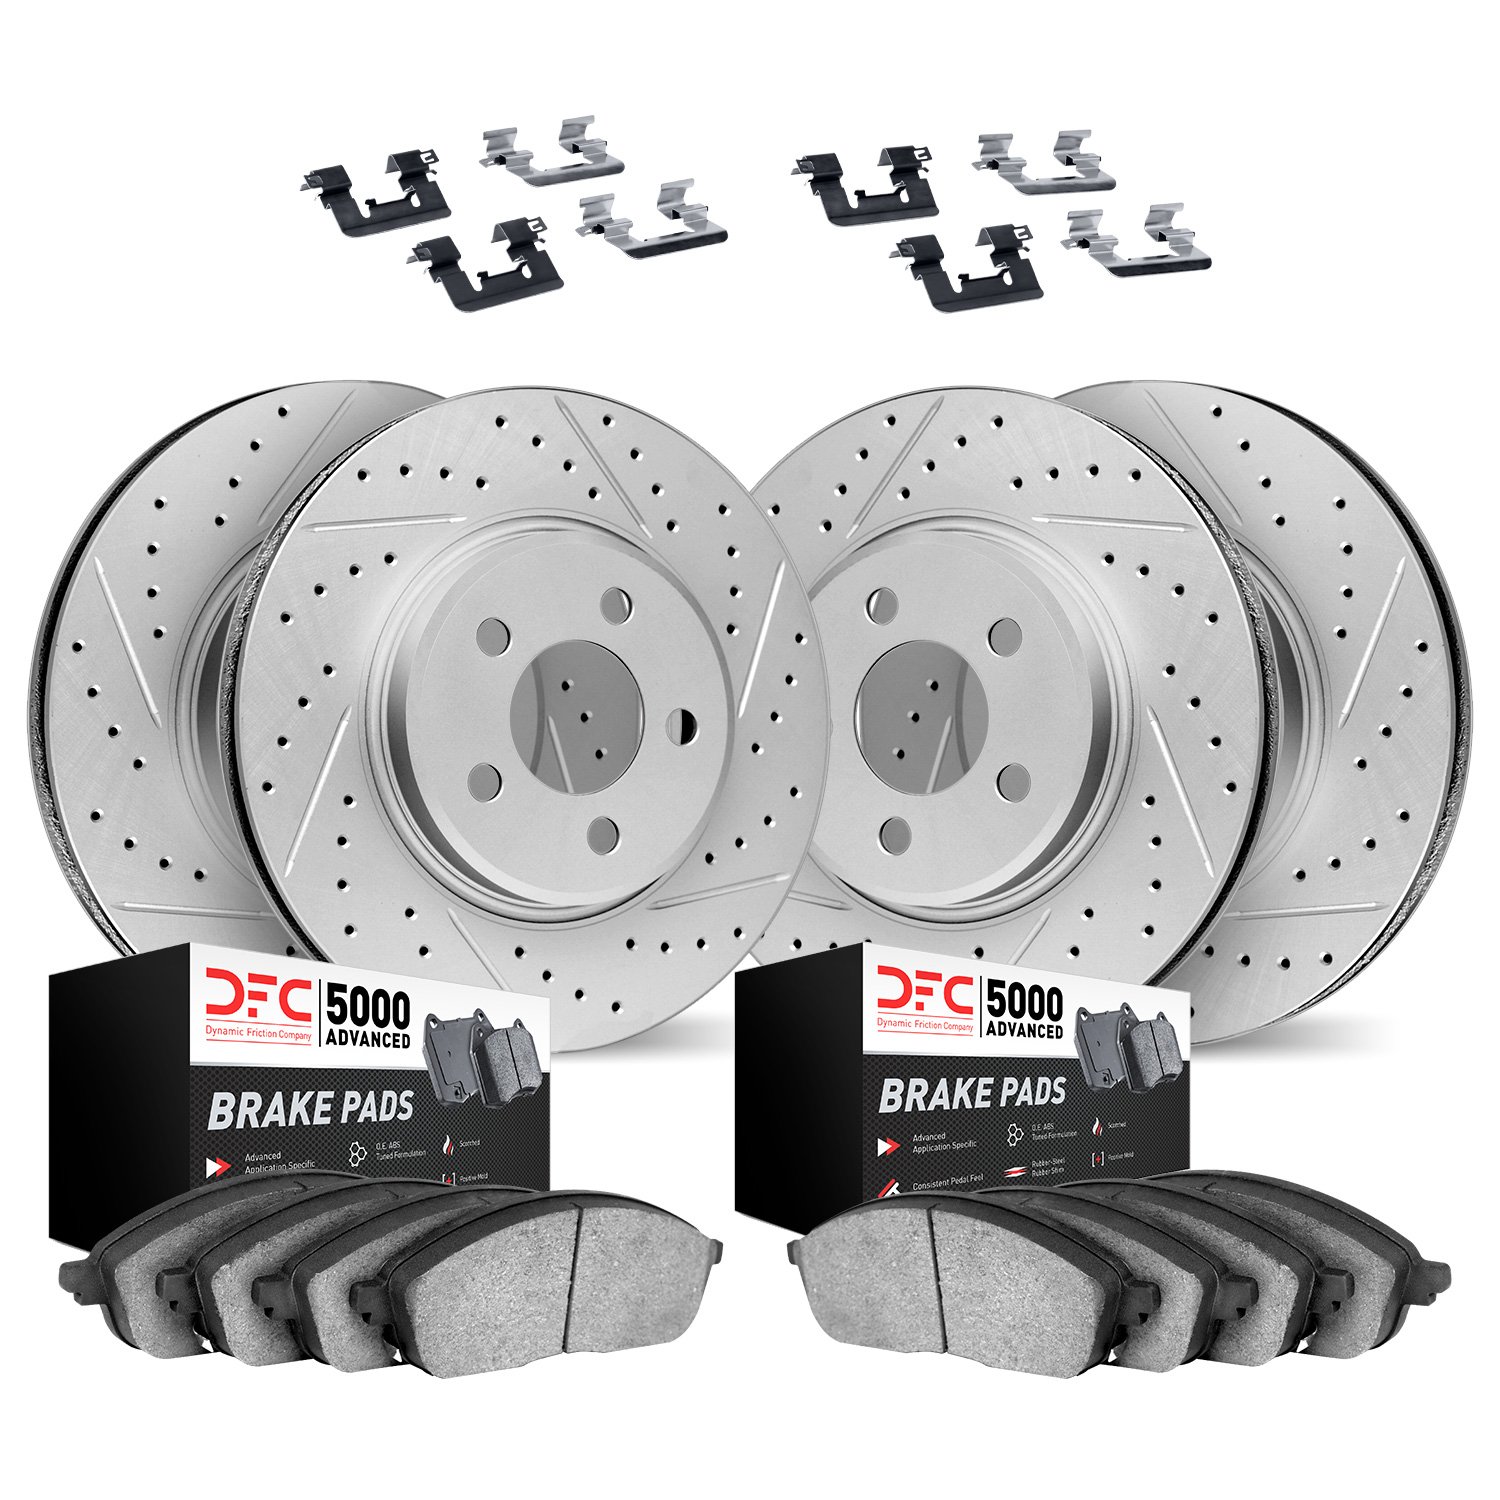 2514-39013 Geoperformance Drilled/Slotted Rotors w/5000 Advanced Brake Pads Kit & Hardware, Fits Select Mopar, Position: Front a